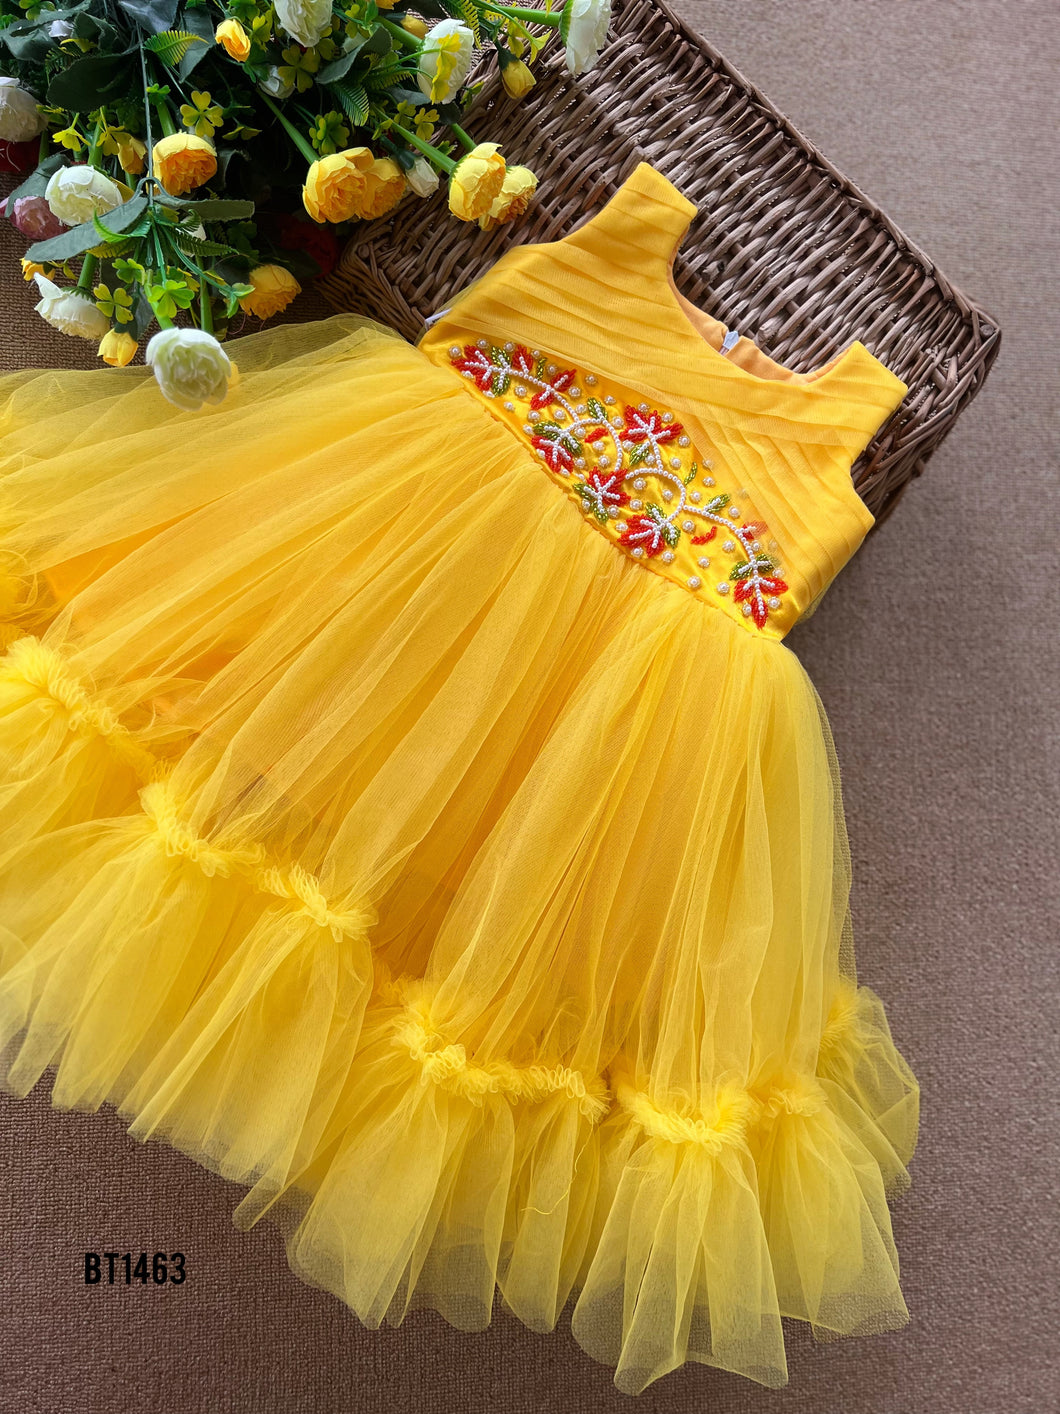 BT1463 Hand Embroidery Birthday Frock